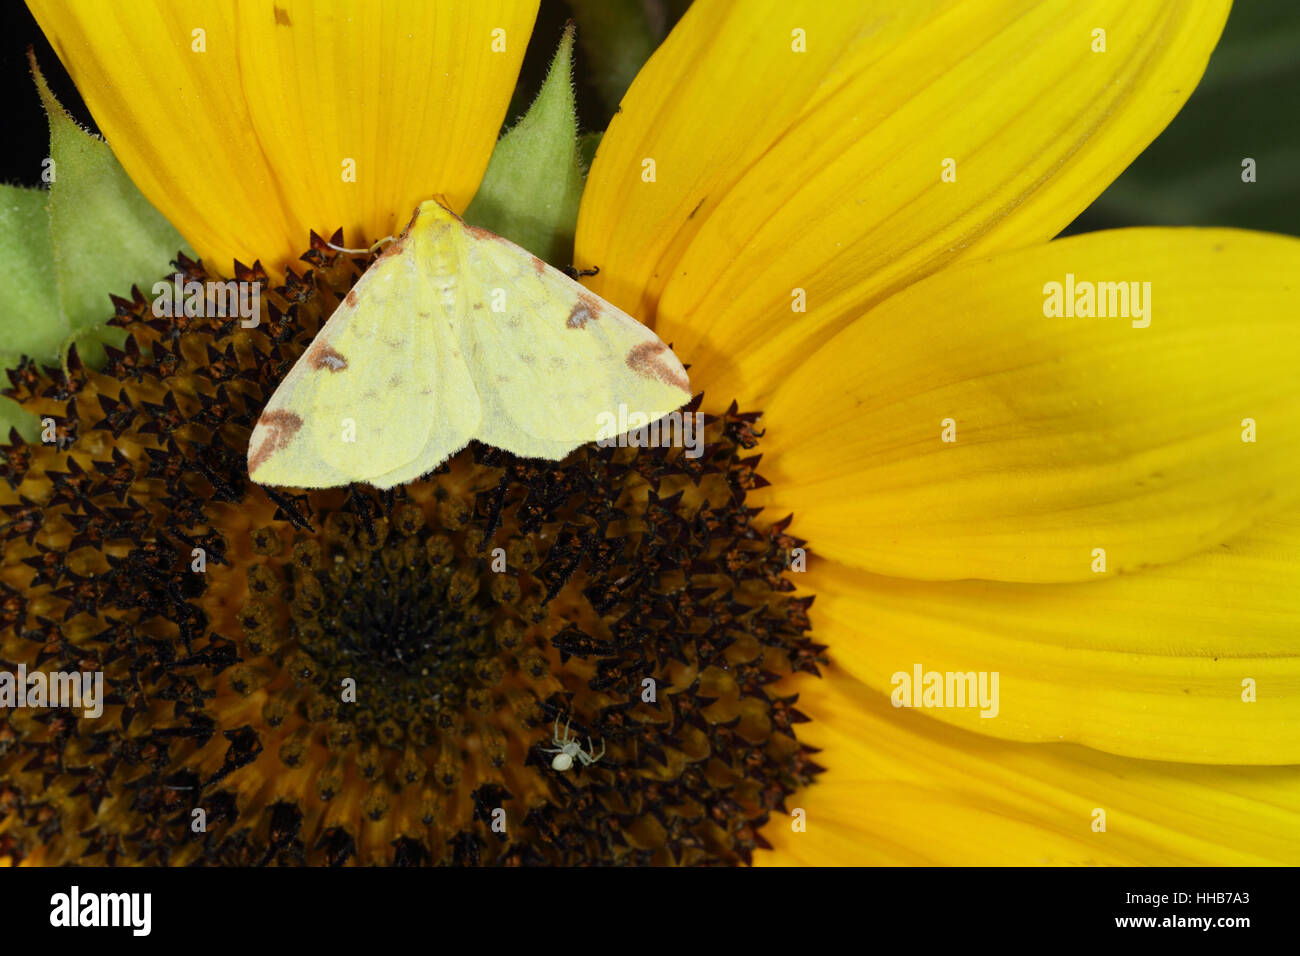 Brimstone Moth (Opisthograptis luteolata), a pale yellow insect perched on a sunflower in a suburban garden in Norfolk Stock Photo